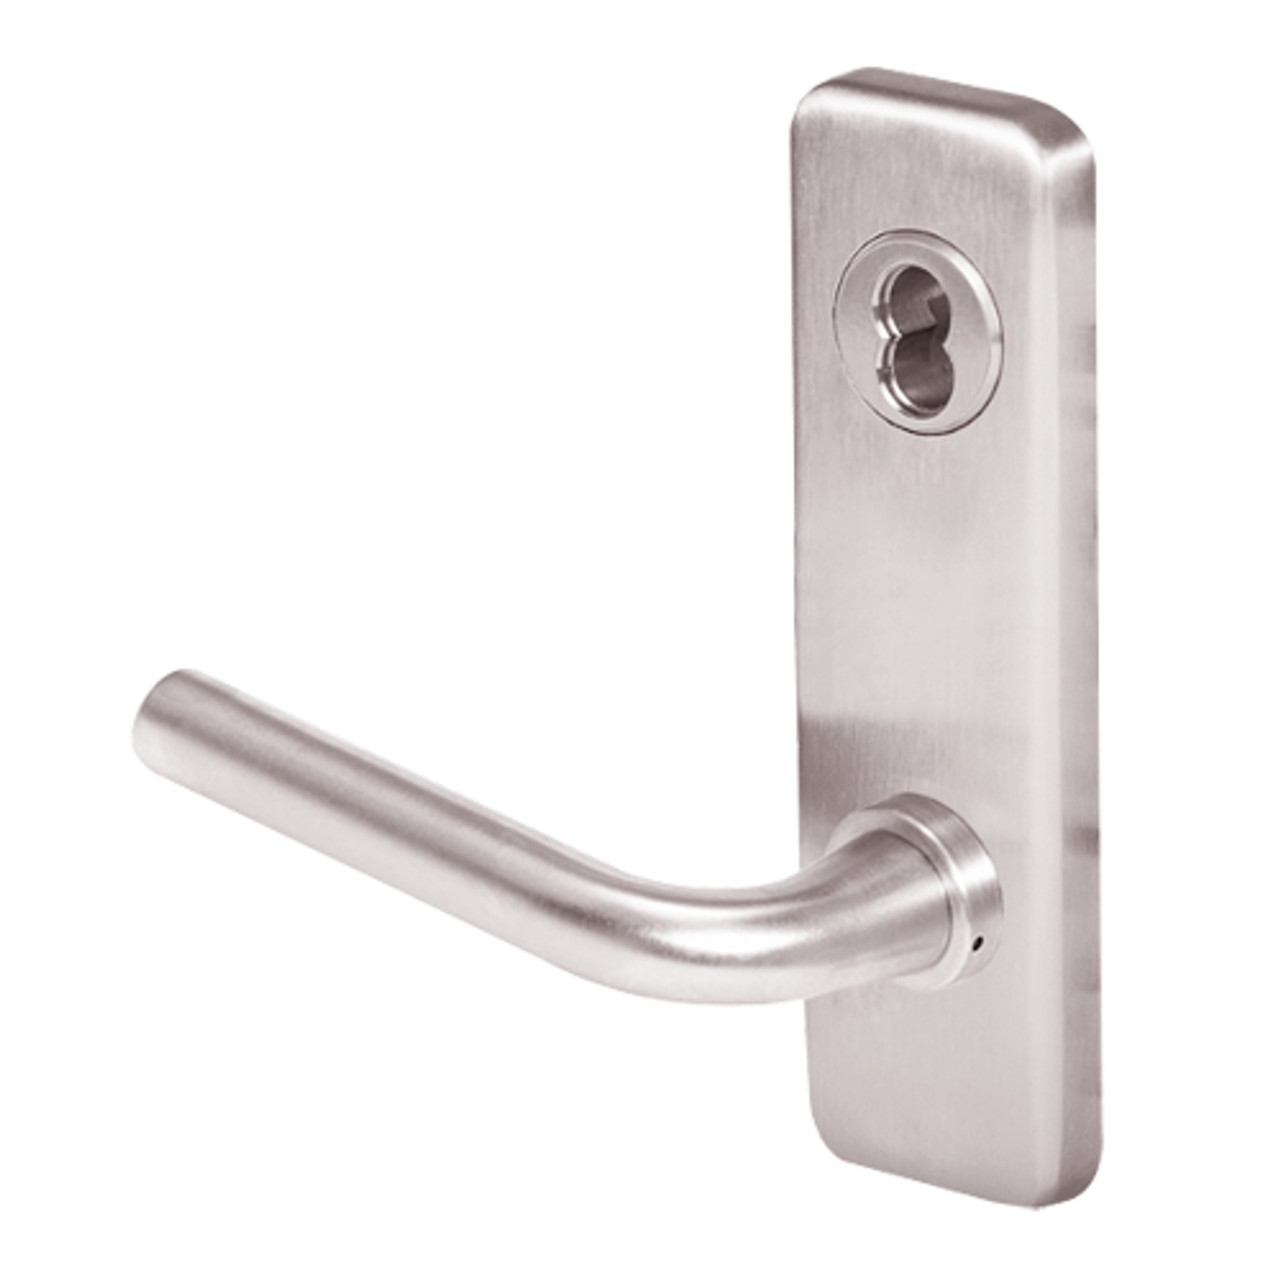 45H0L12J629 Best 40H Series Privacy with Deadbolt Heavy Duty Mortise Lever Lock with Solid Tube with No Return in Bright Stainless Steel